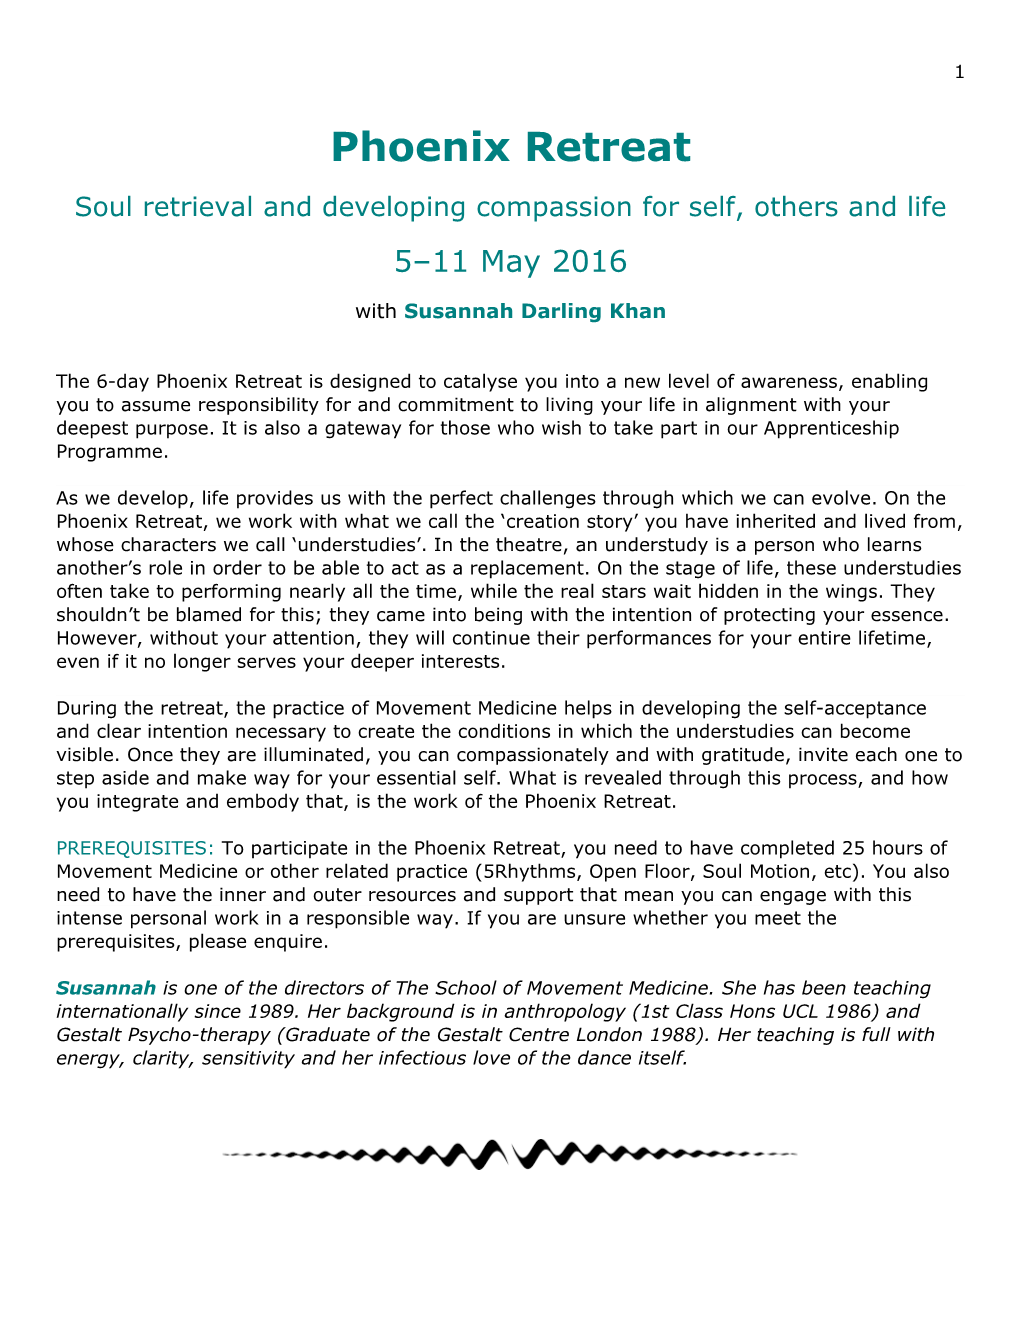 Soul Retrieval and Developing Compassion for Self, Others and Life